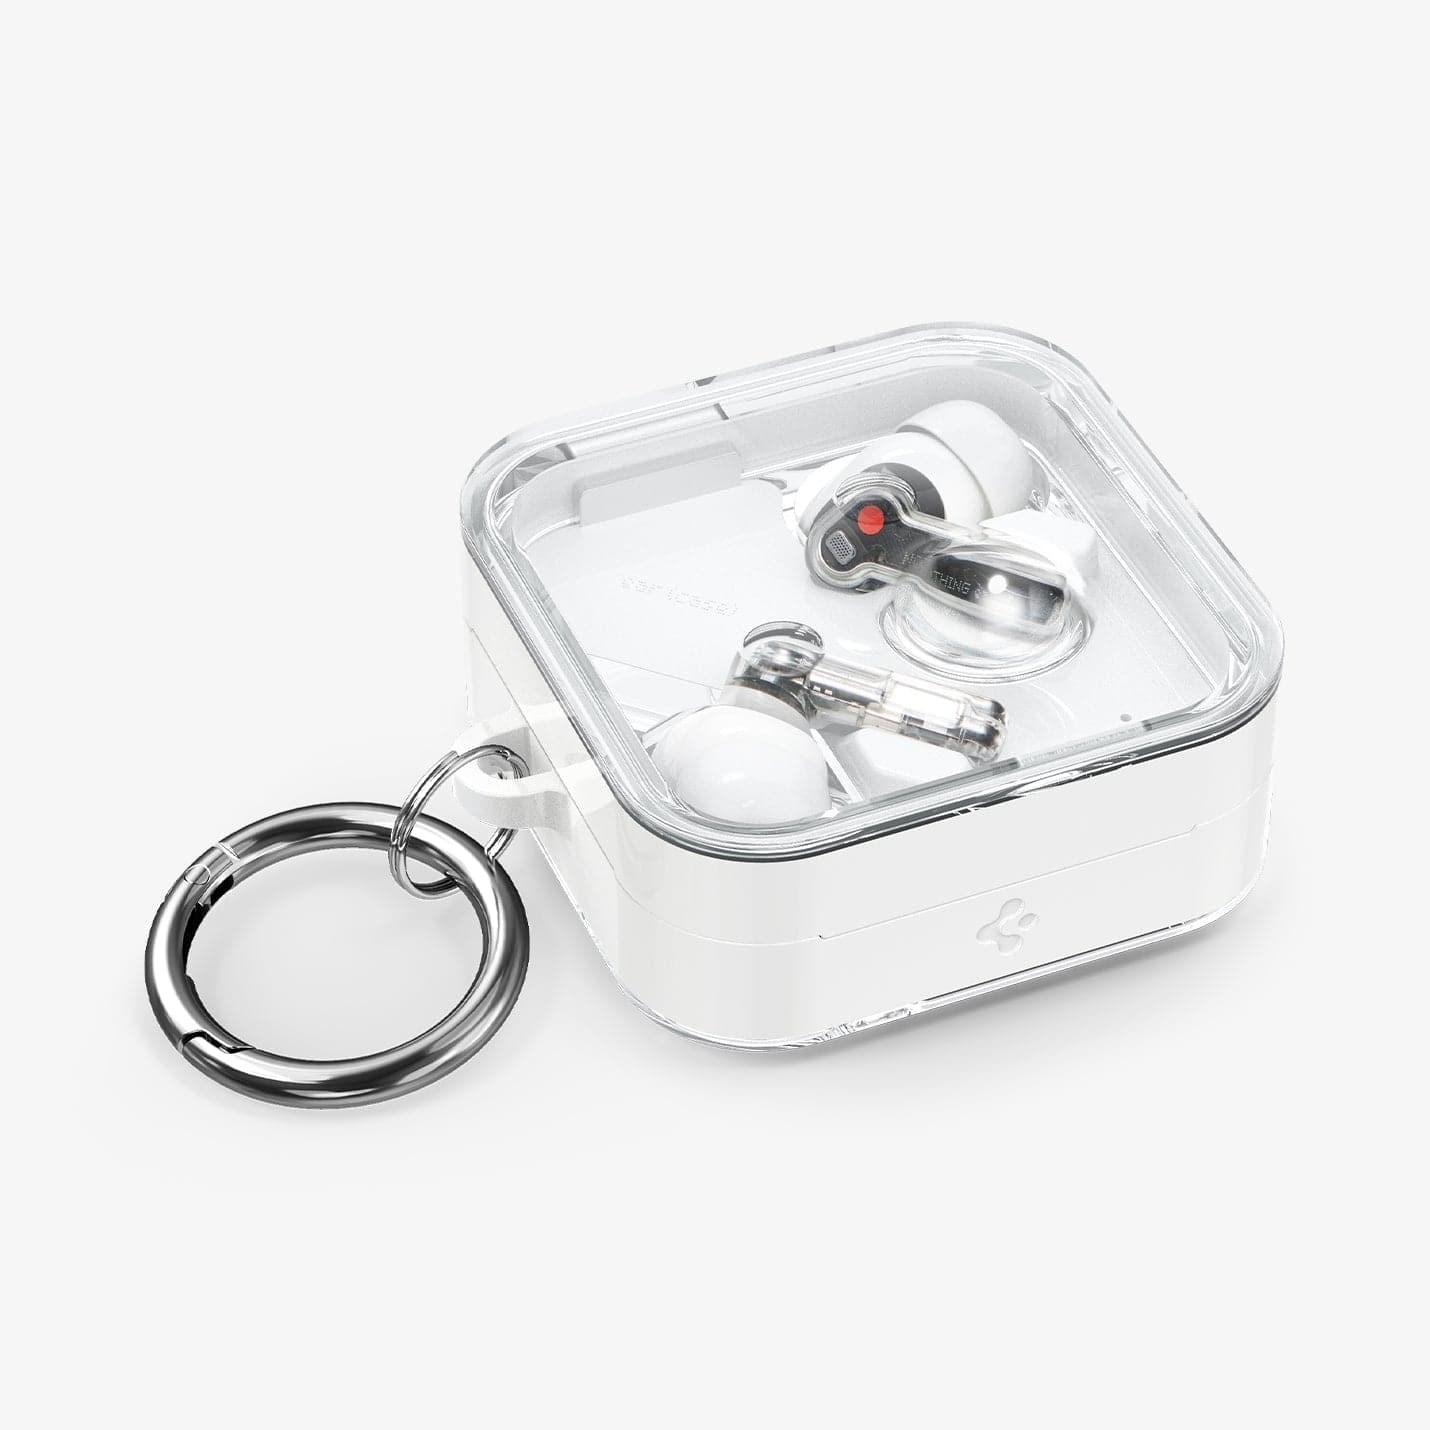 ACS06434 - Nothing Ear (2) Case Ultra Hybrid in jet white showing the top, side and carabiner